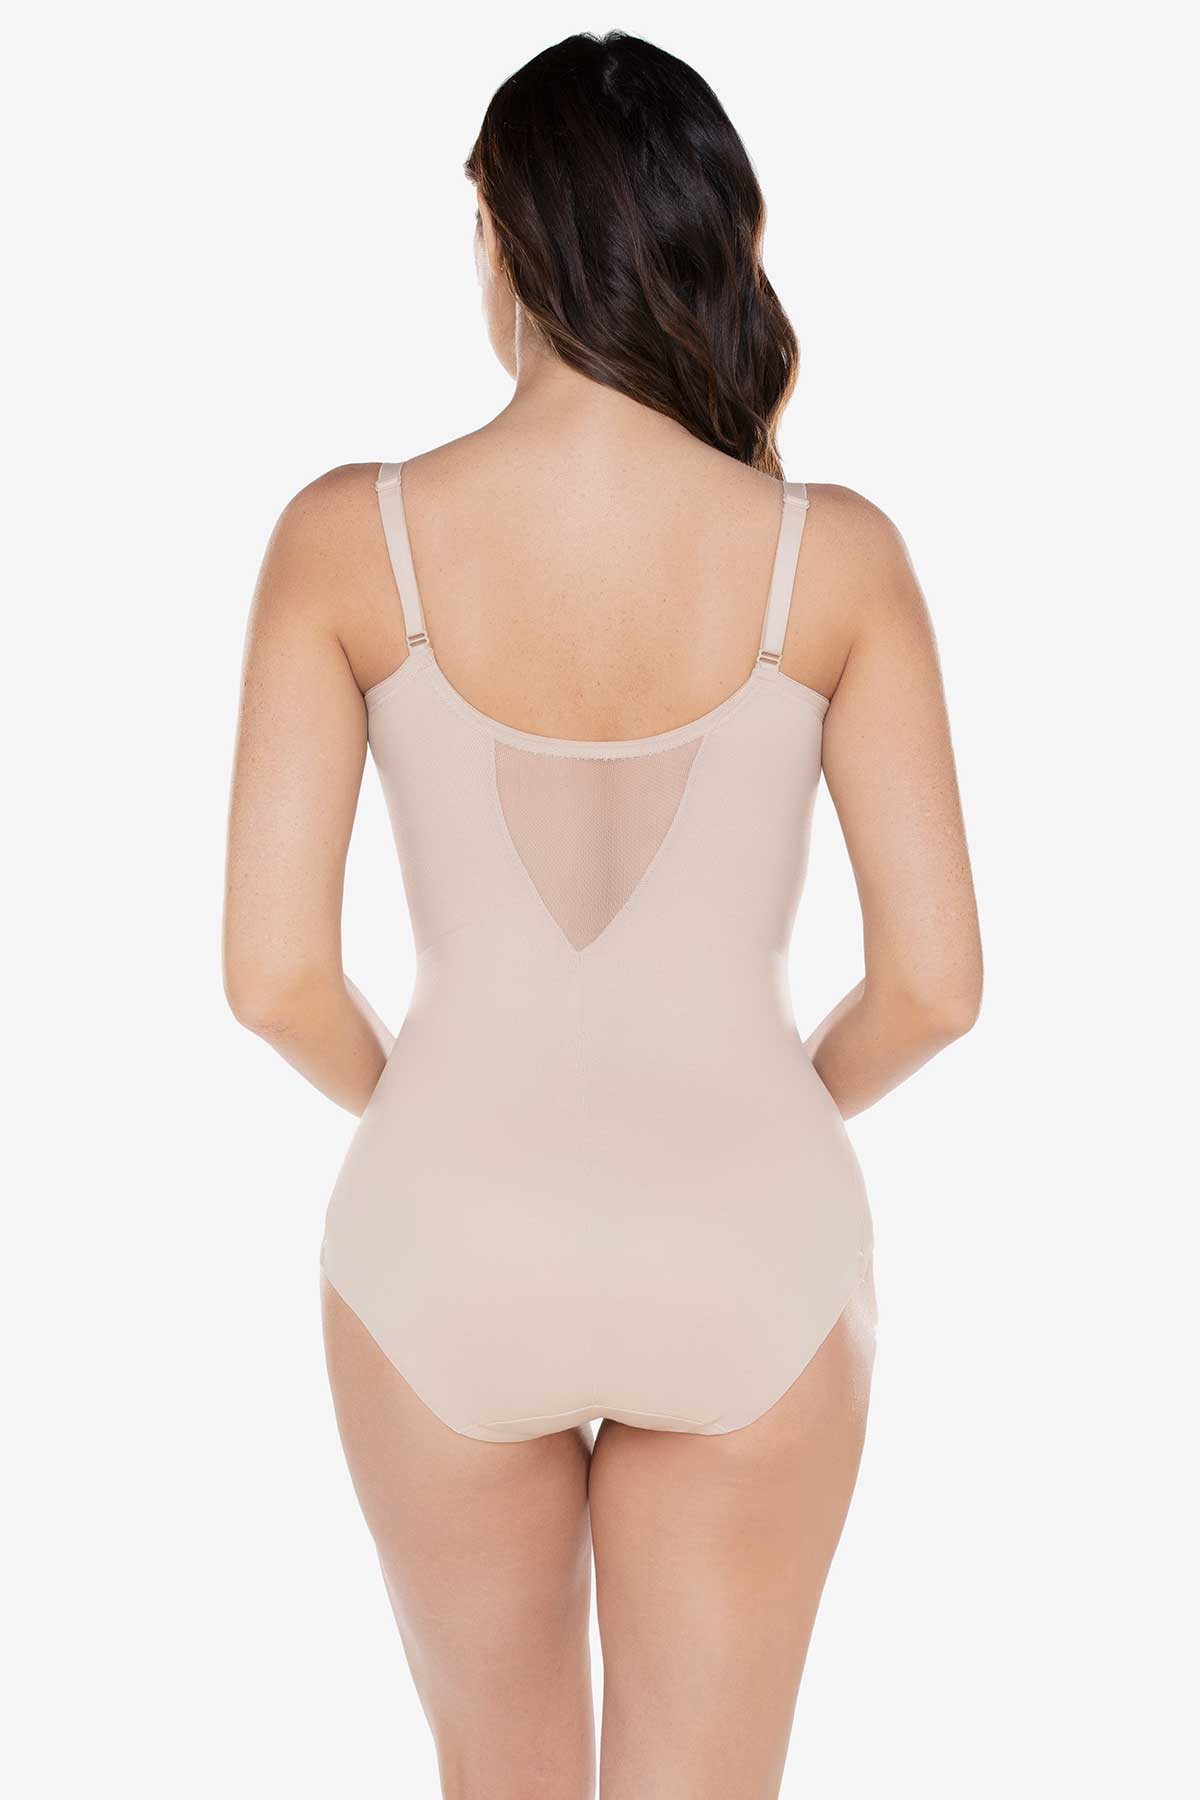 Miraclesuit Shape Away Extra Firm Control Open-Bust Torsette, M, Nude-2911